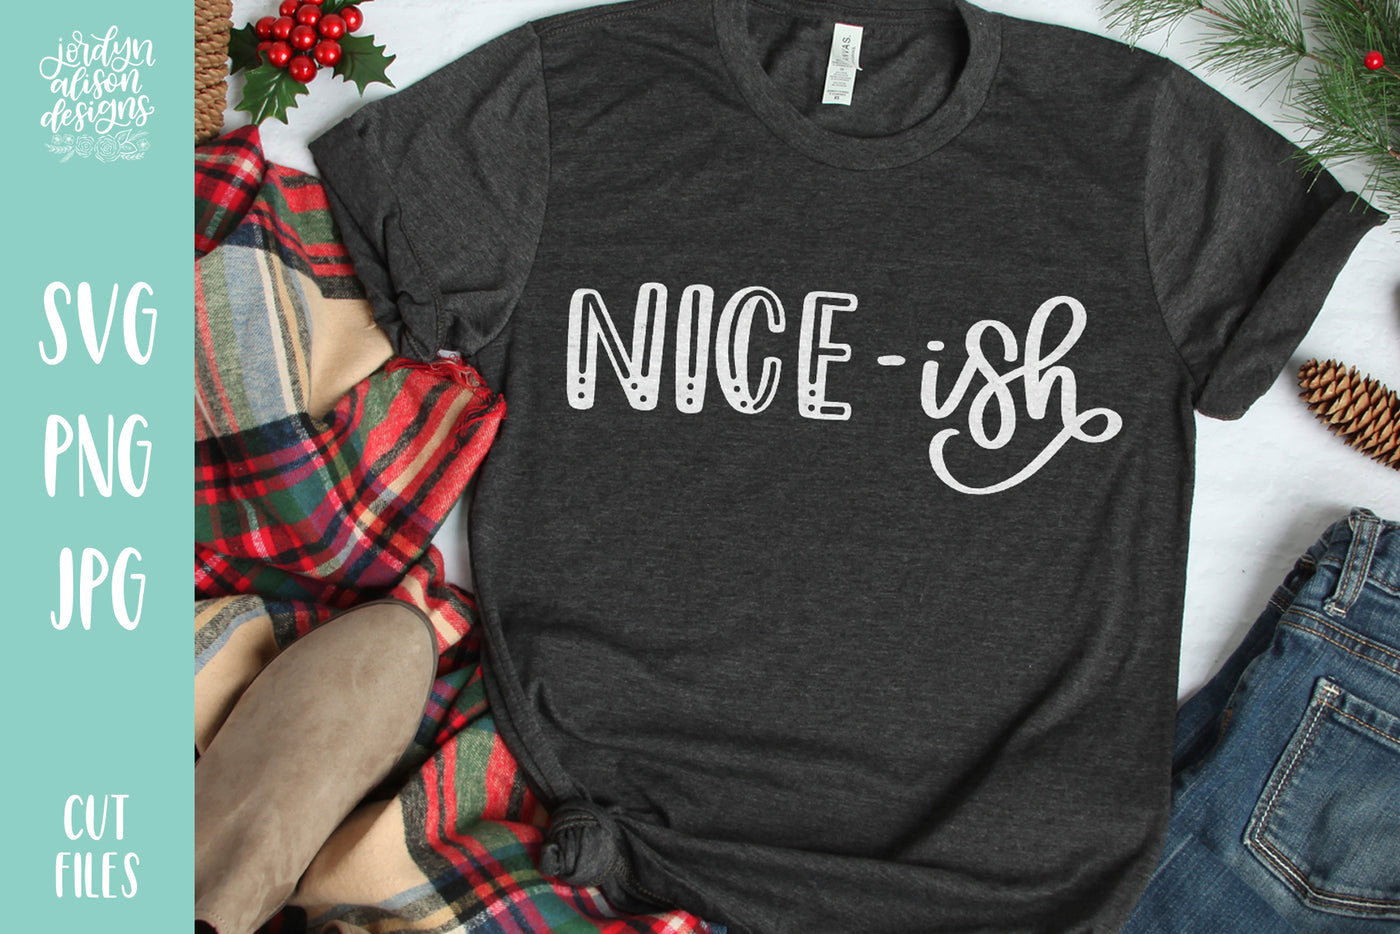 Grey T-Shirt with Handwritten text "Nice-ish" in white letters